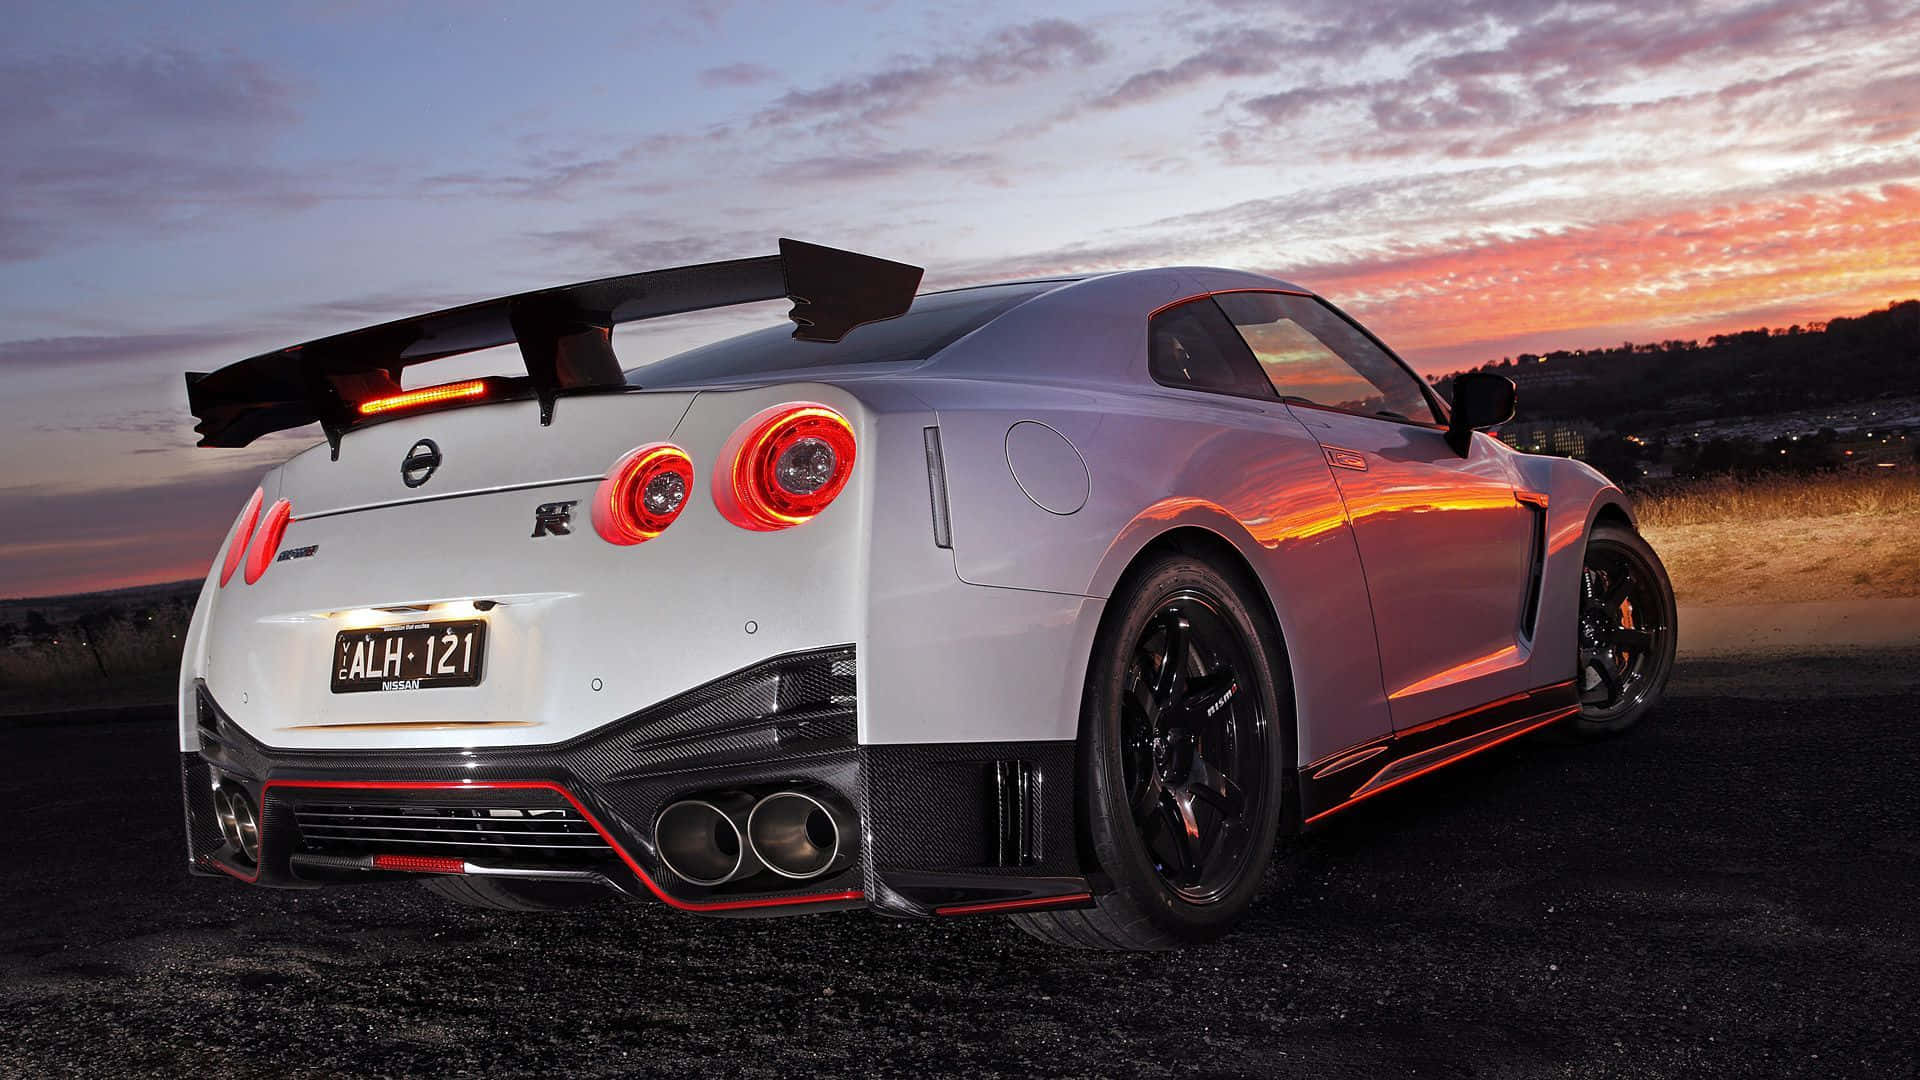 Diefast And The Furious: Gtr R35 Wallpaper